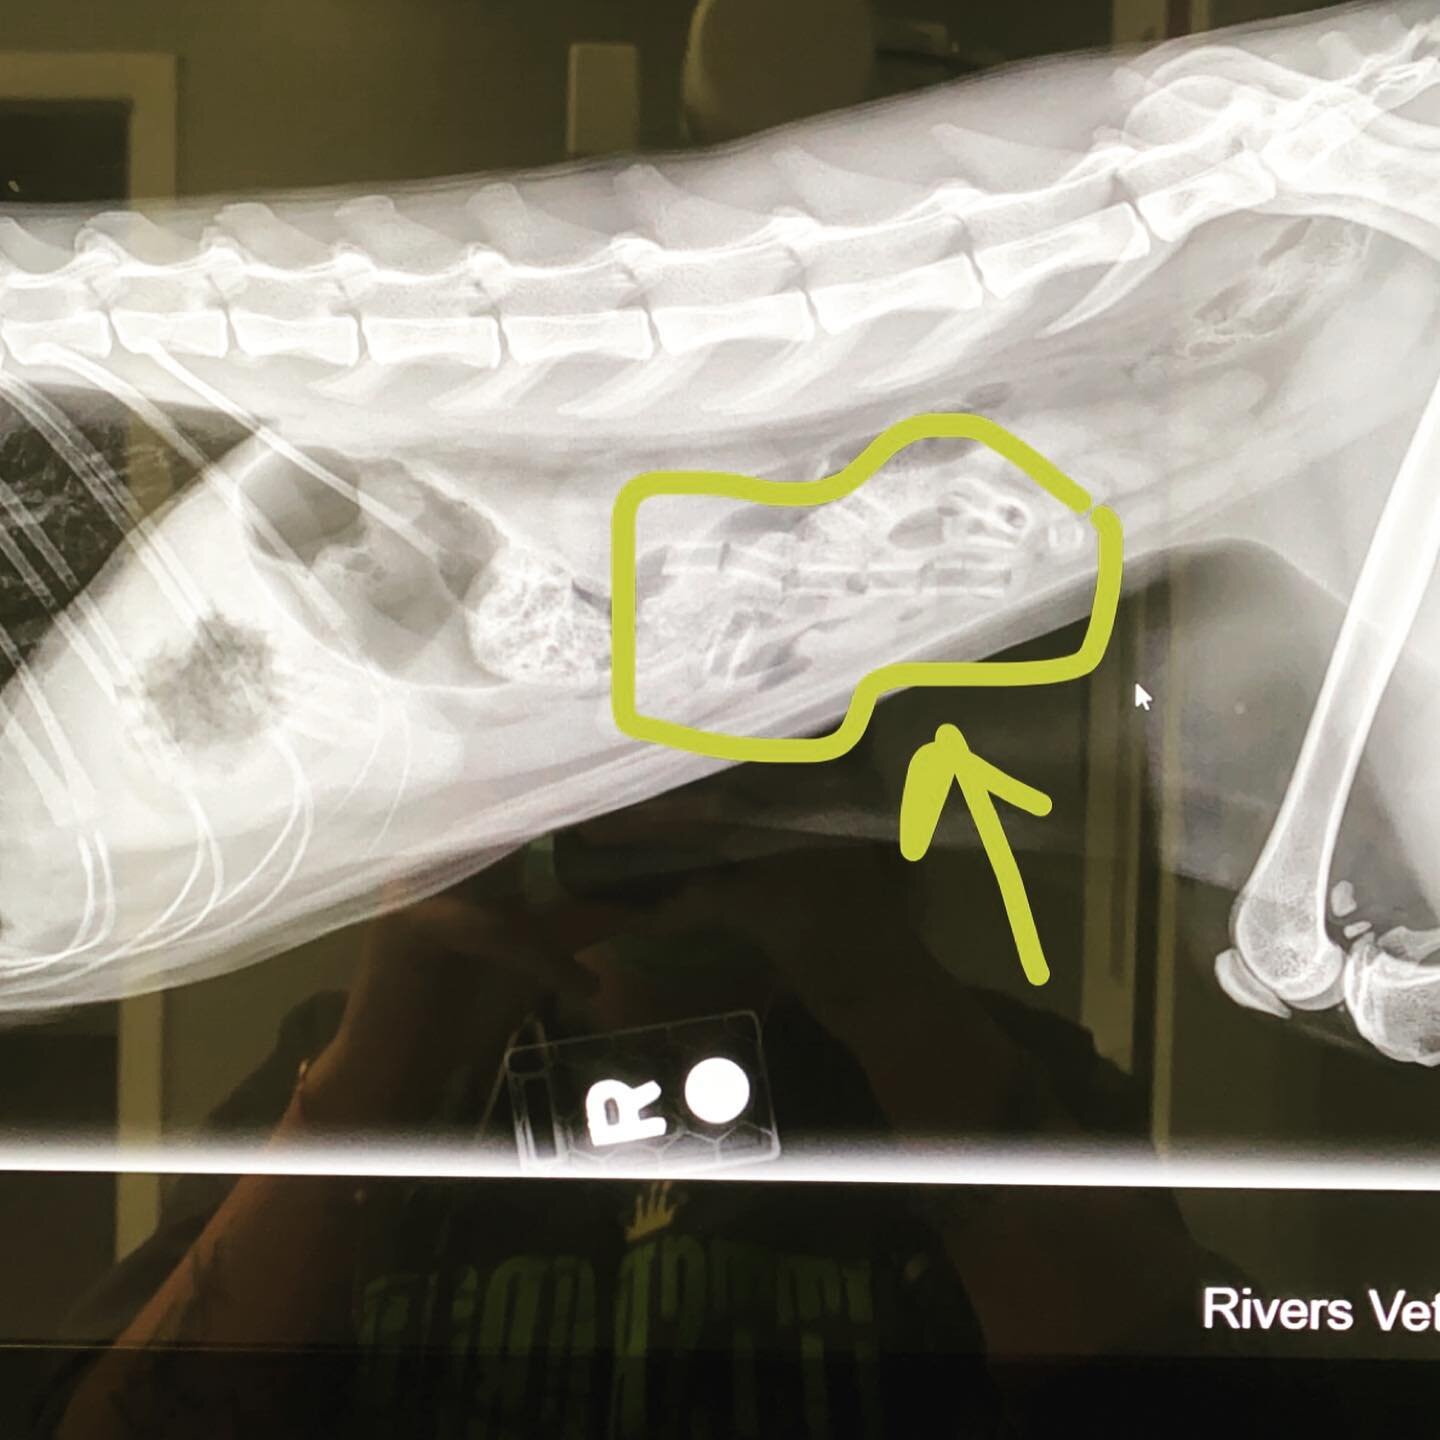 It&rsquo;s very common for cats and dogs to eat objects: toys, string, balls, bones, nerf guns, socks ... this cat chewed up pieces of a rubber tube. We did something called &ldquo;treat and repeat&rdquo; - we gave him so fluids and GI protectants, a